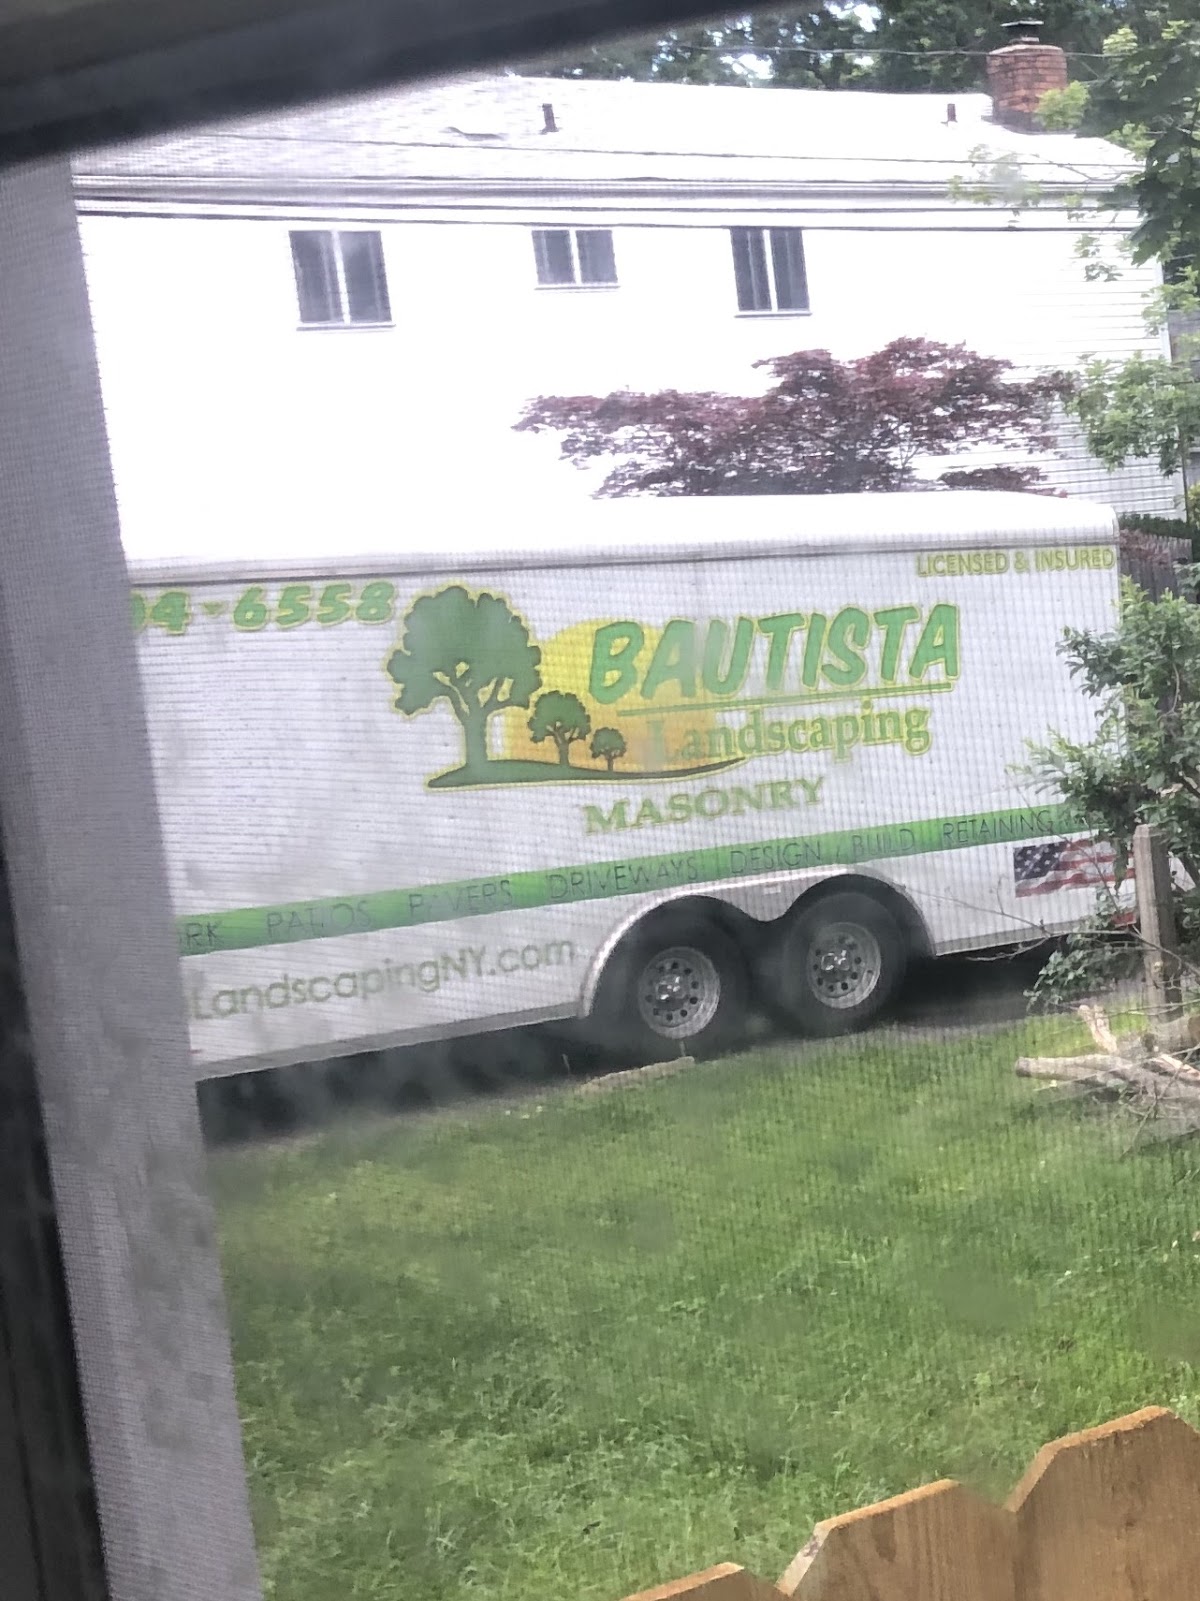 Relocated to the Huntington area about a year ago. Bautista Landscaping has always been reliable and affordable